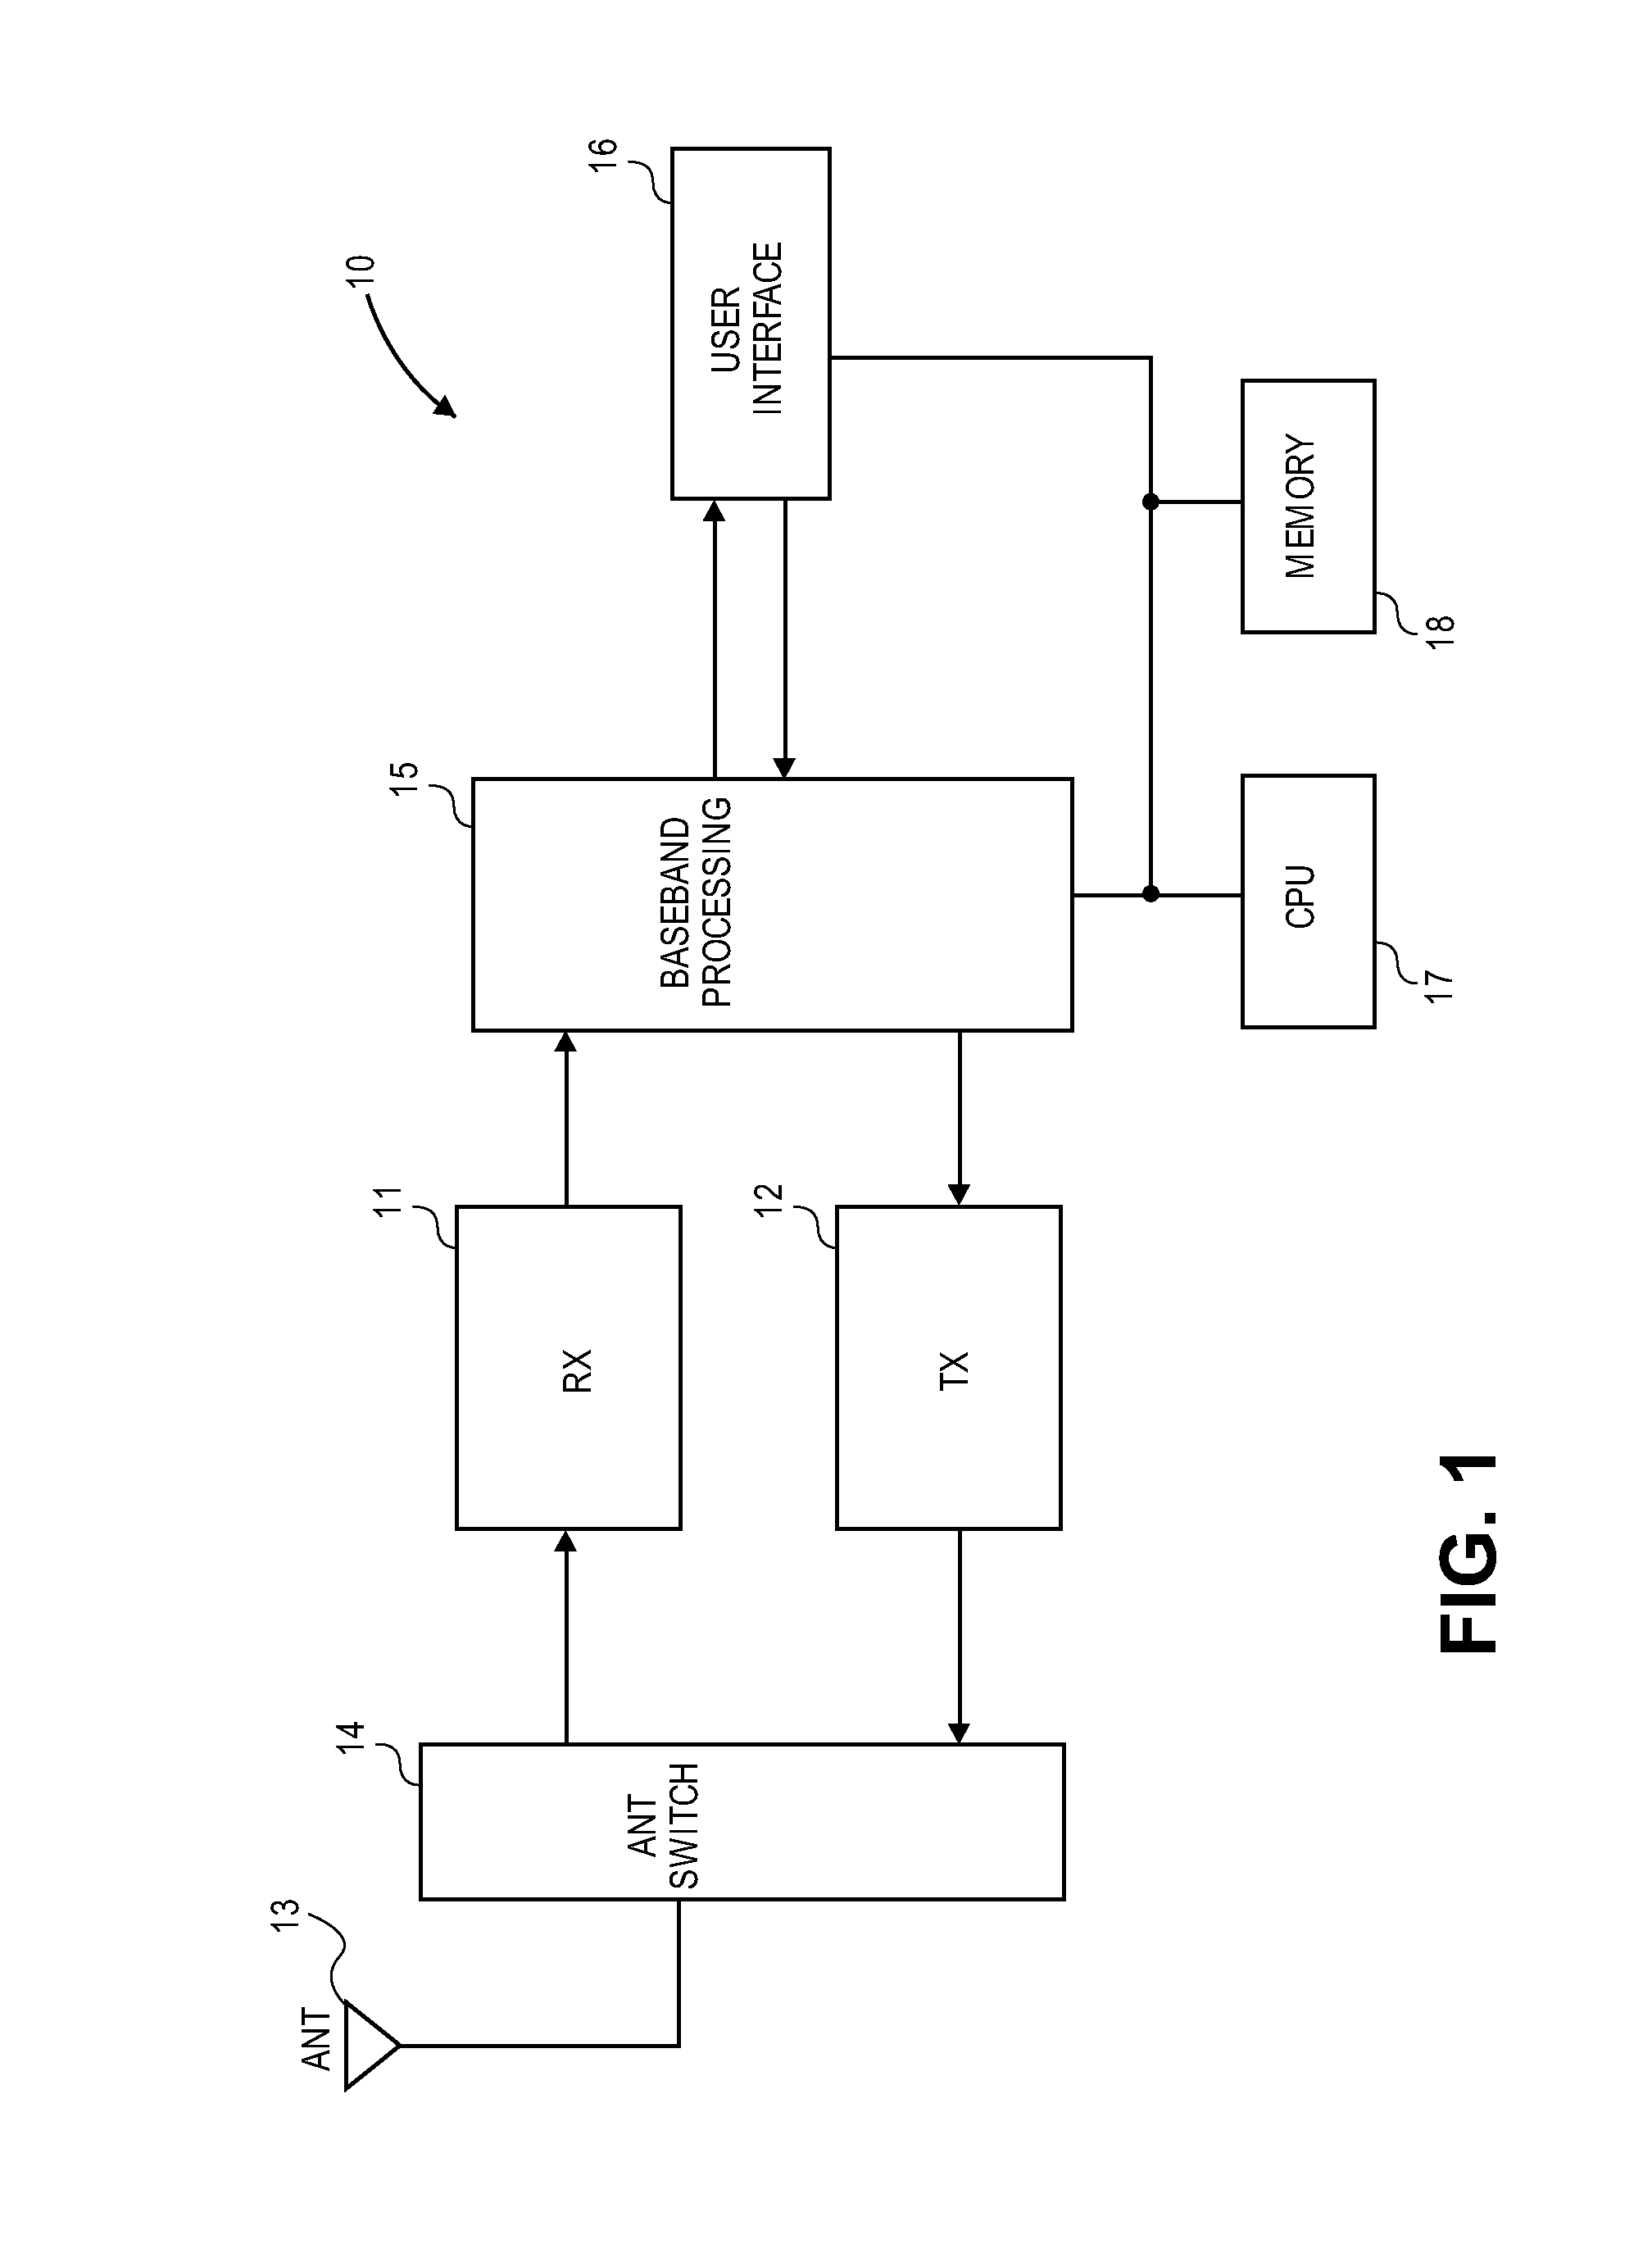 Method for agile region and band conscious frequency planning for wireless transceivers